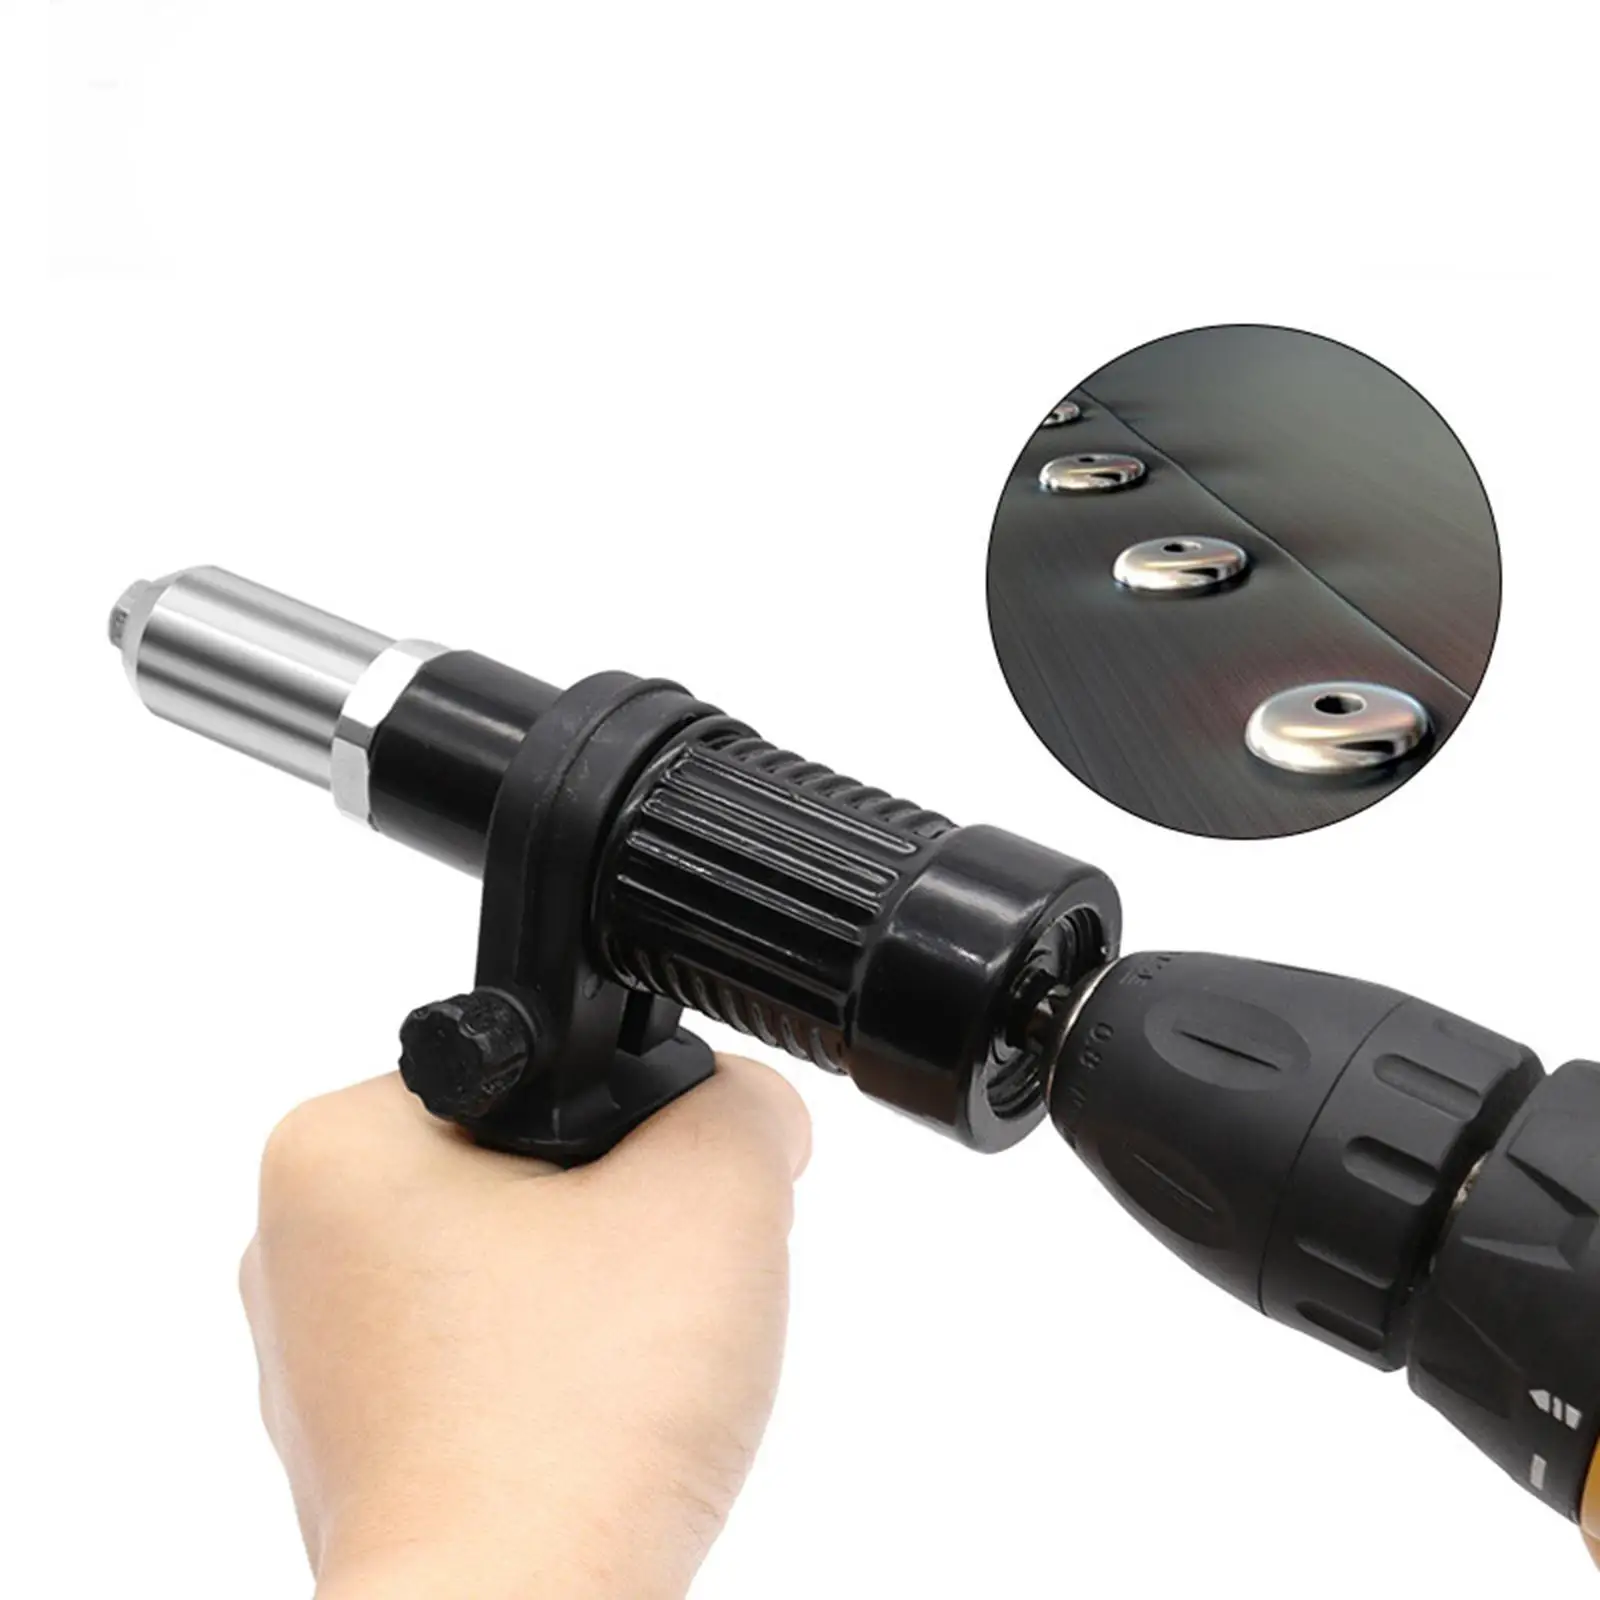 Riveting Adapter Riveting Machine Adapter Core Pulling Cordless Riveting Drill Joint Adapter Portable Riveting Adapter Joint